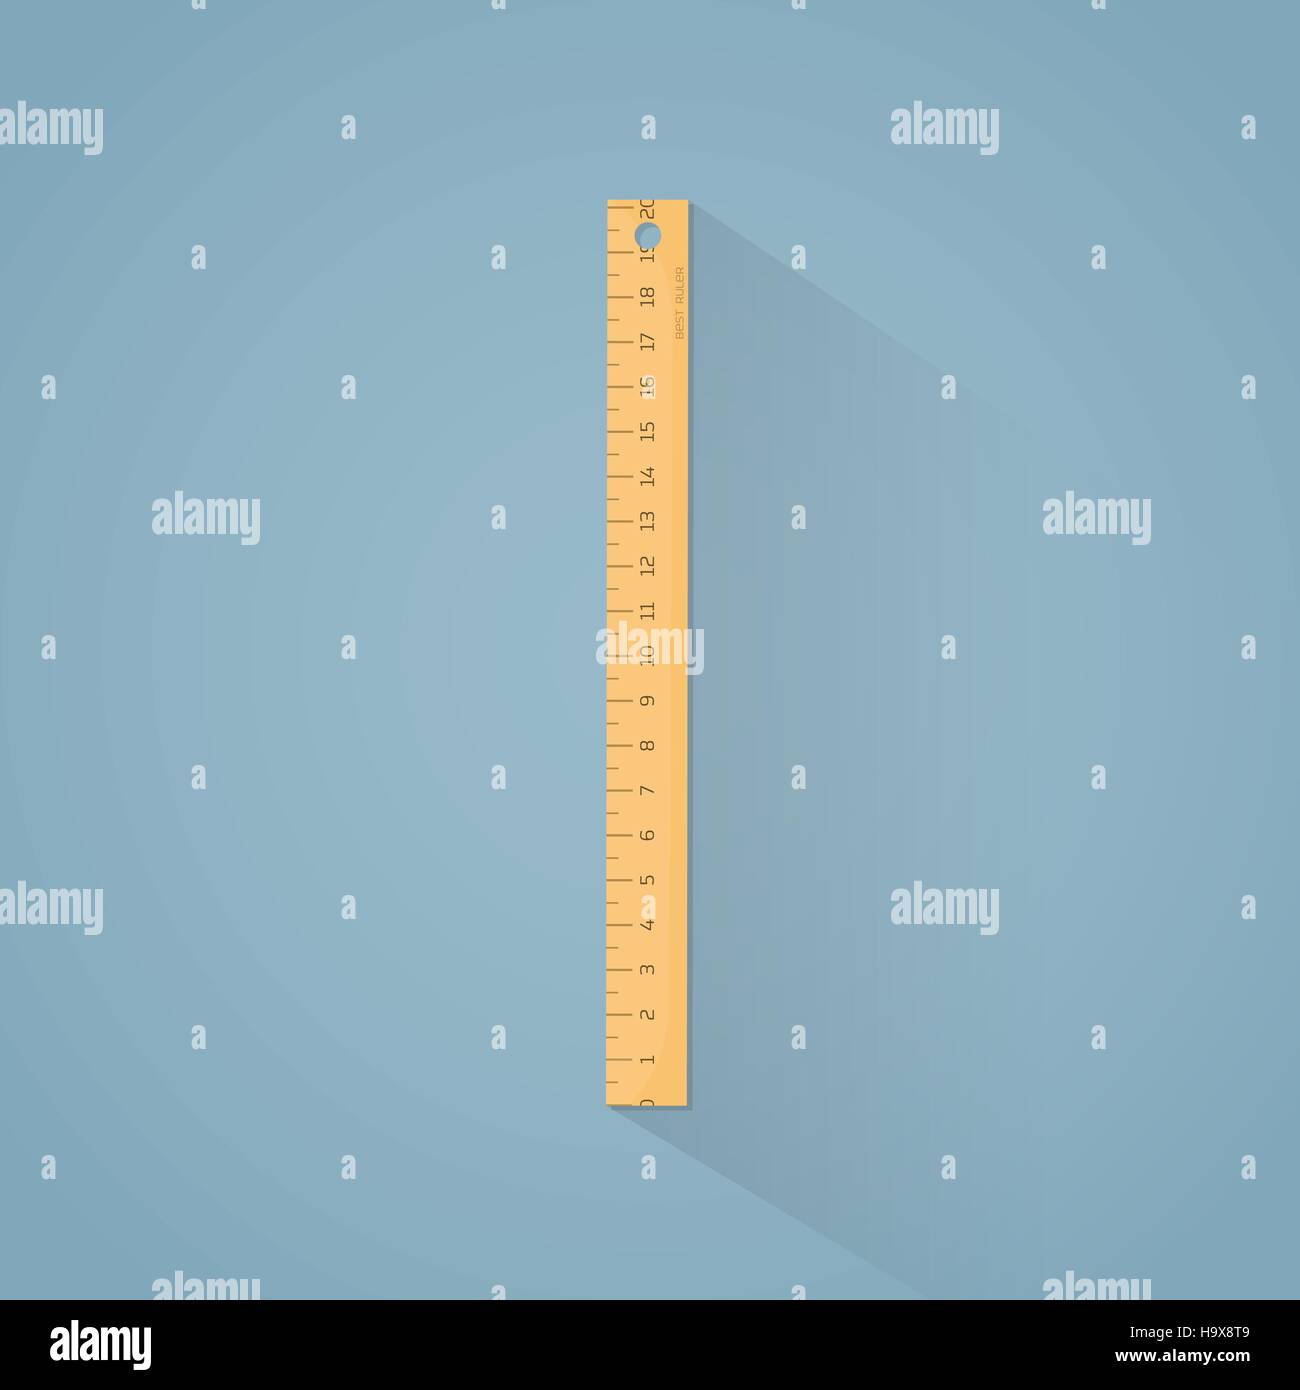 Flat illustration. Wooden ruler with centimeters scale. Stock Vector